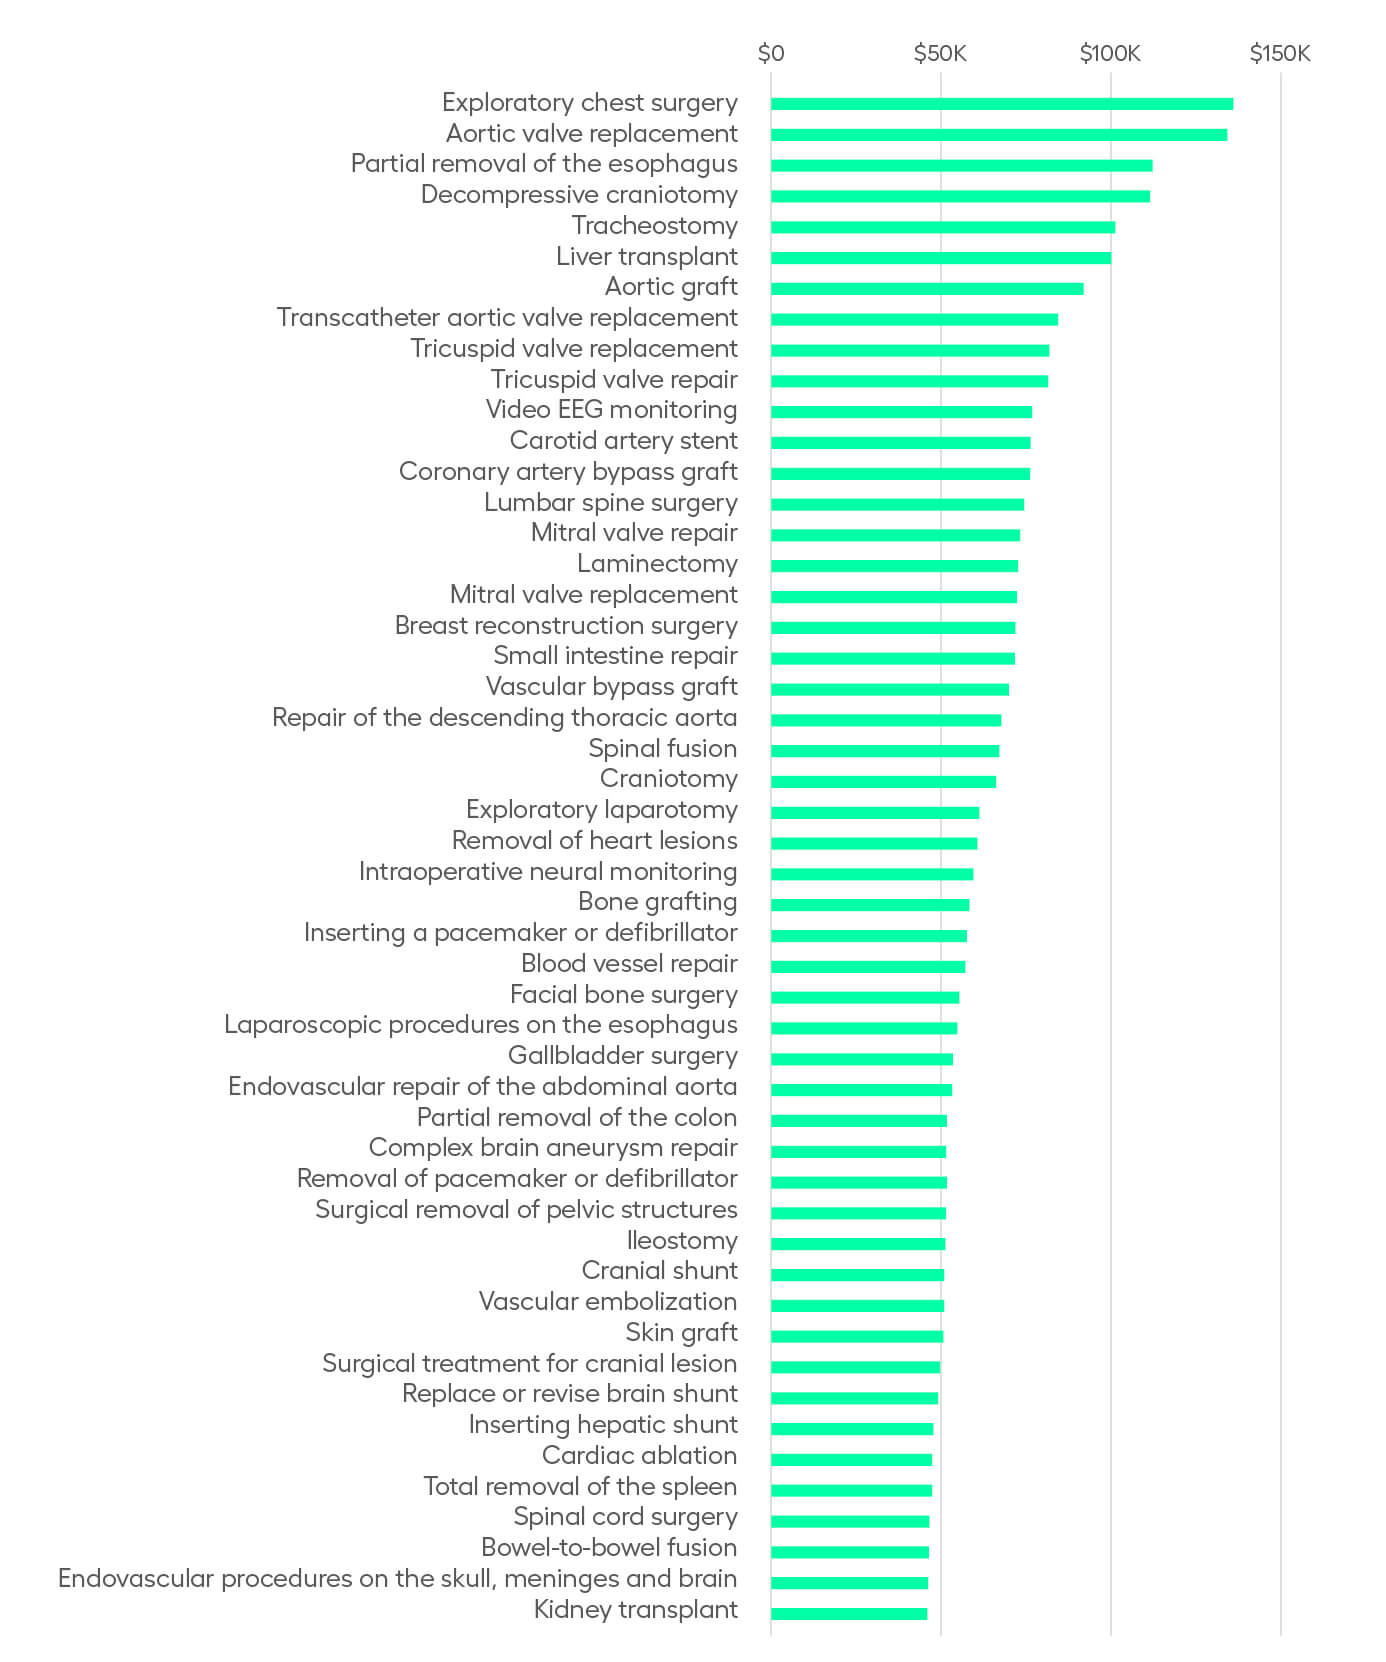 Graph showing the top 50 most expensive medical procedures